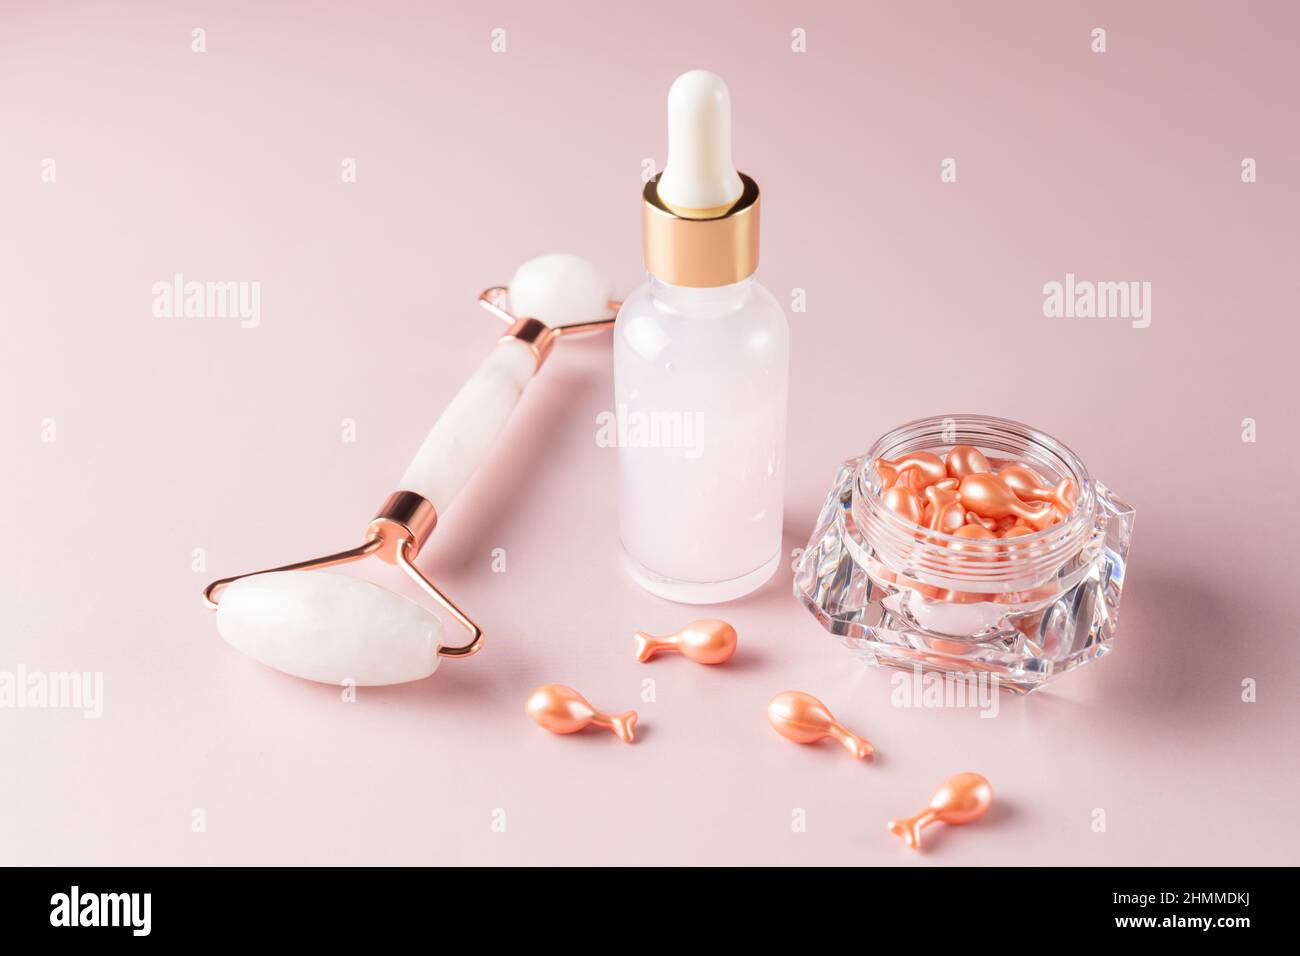 beauty treatment cosmetic set for dayl skin care routine. Single dose serum capsules. brauty oil in dropper bottle and rose quartz massage roller on p Stock Photo